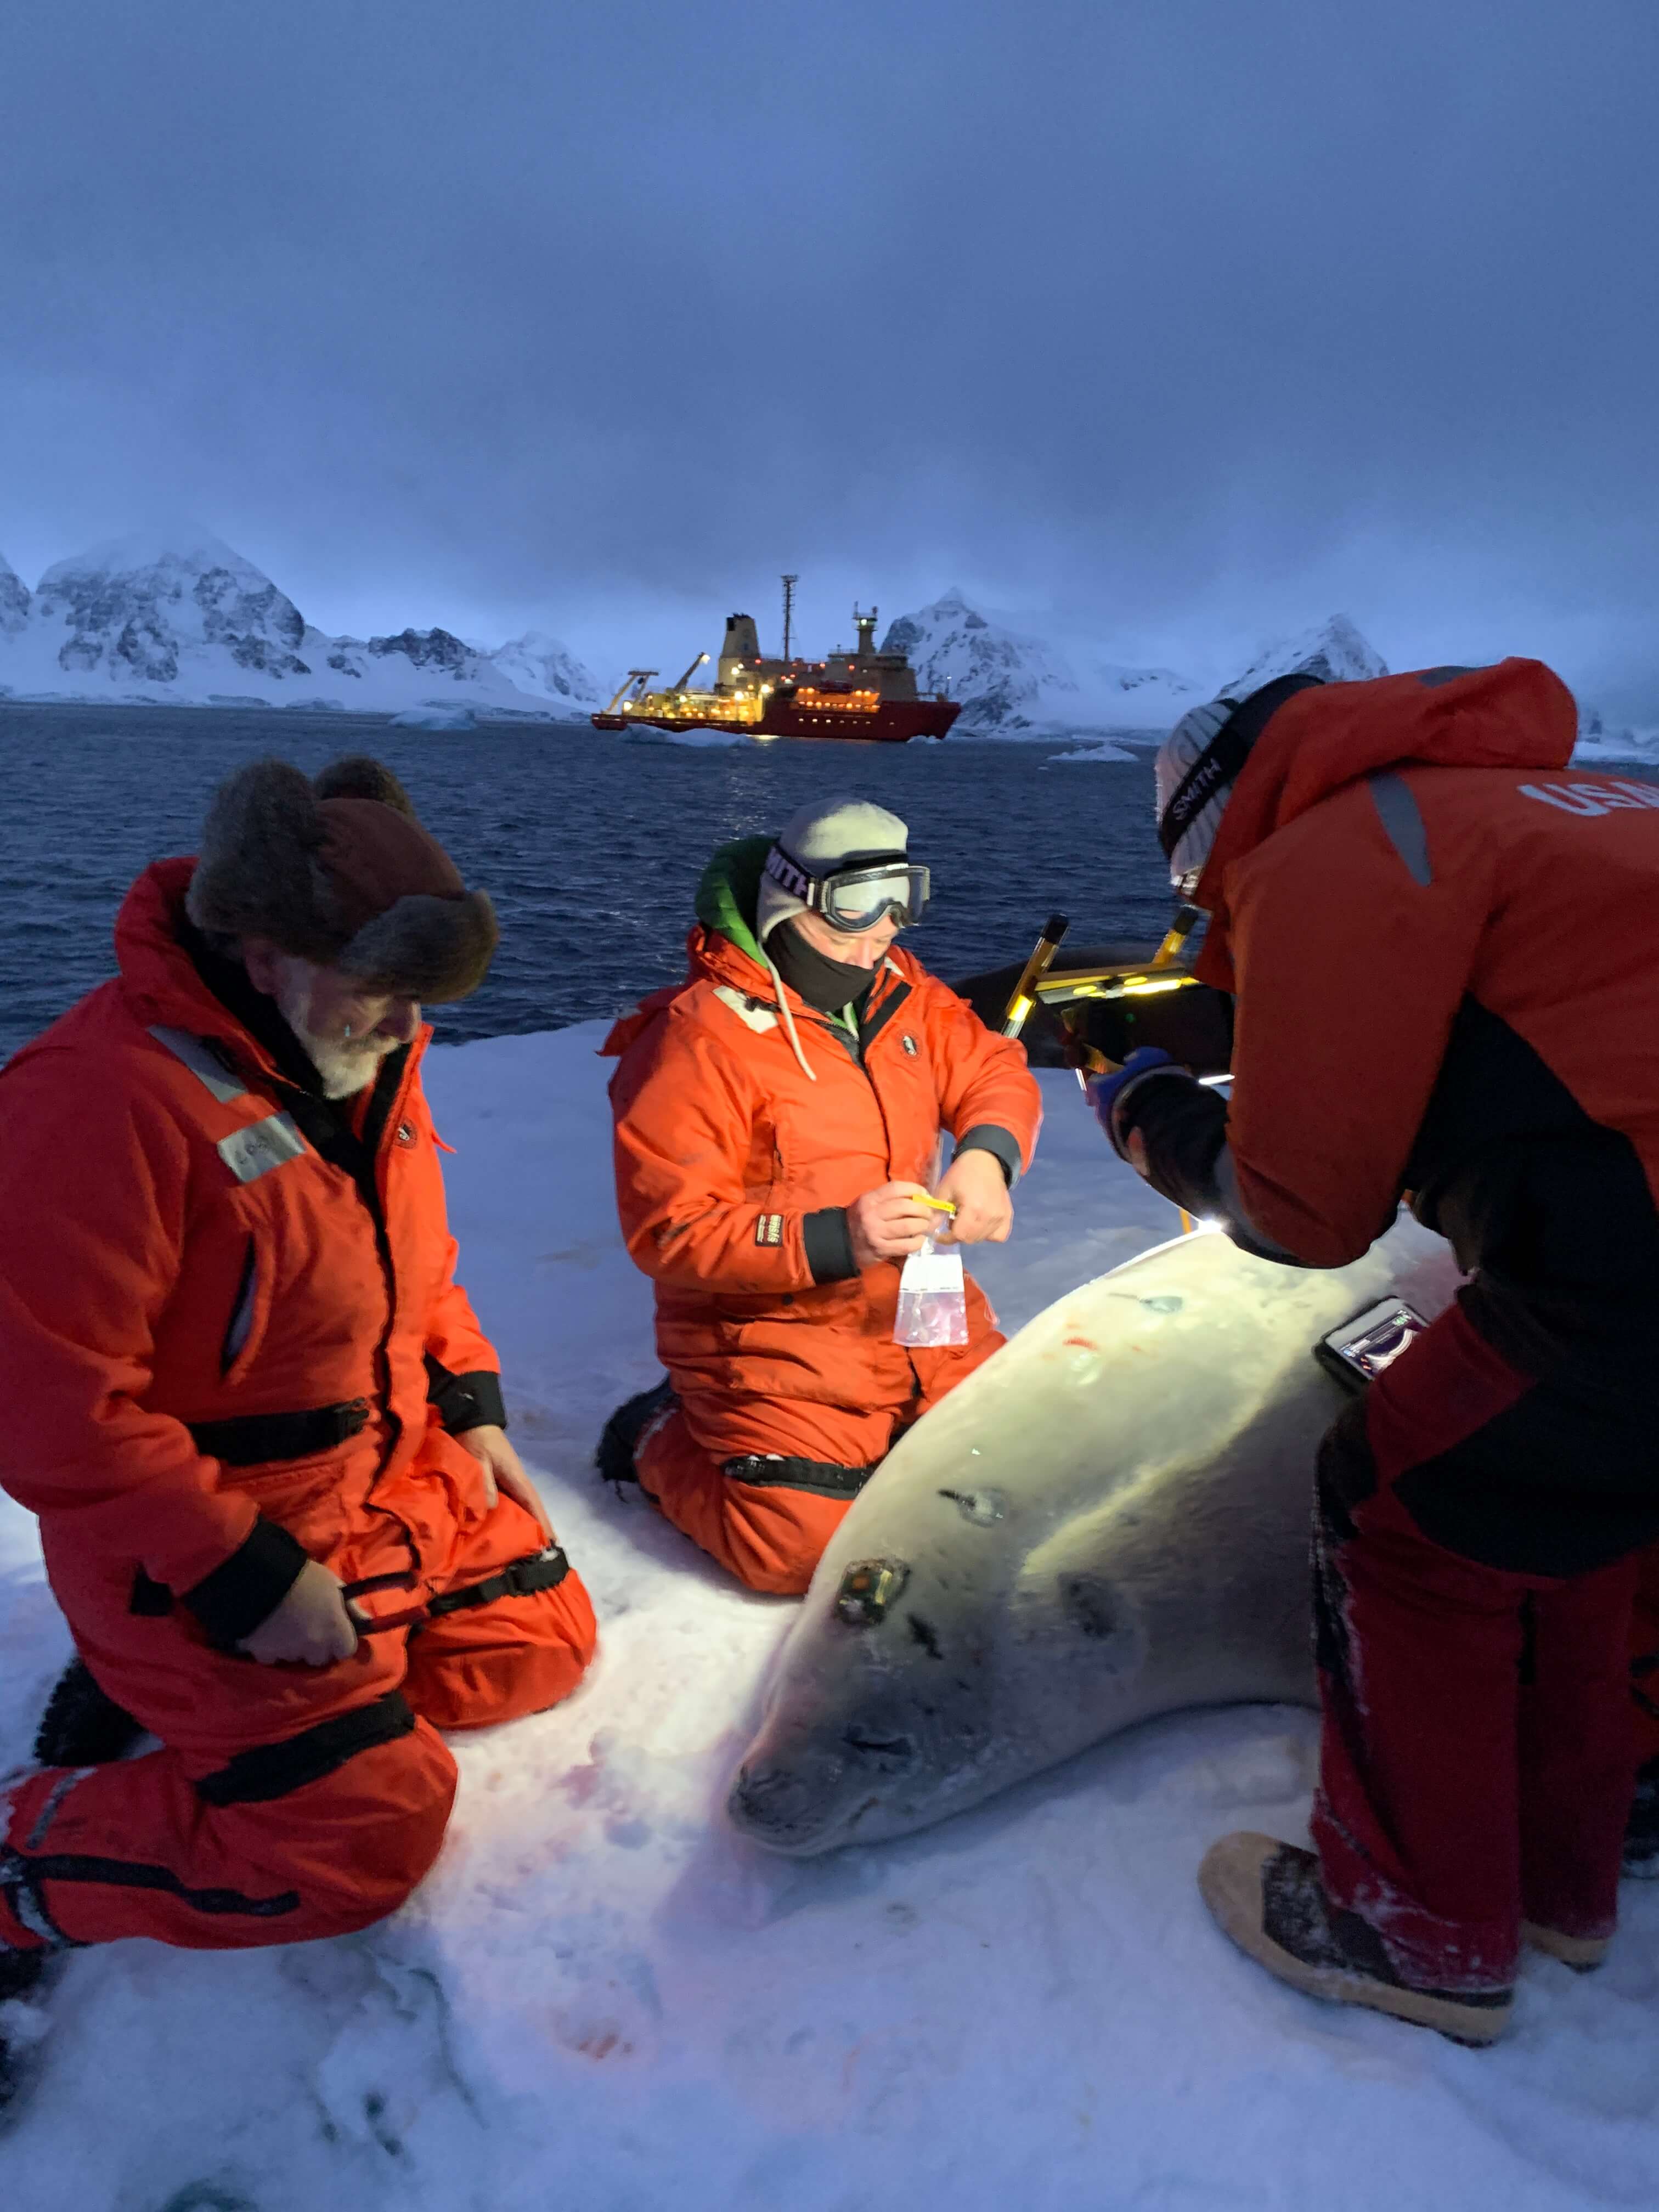 Dan Costa (left) and Luis Huckstadt (middle) tagging a crabeater seal. Study conducted under US NMFS permit 25770. Photo credit: Matt Cabell